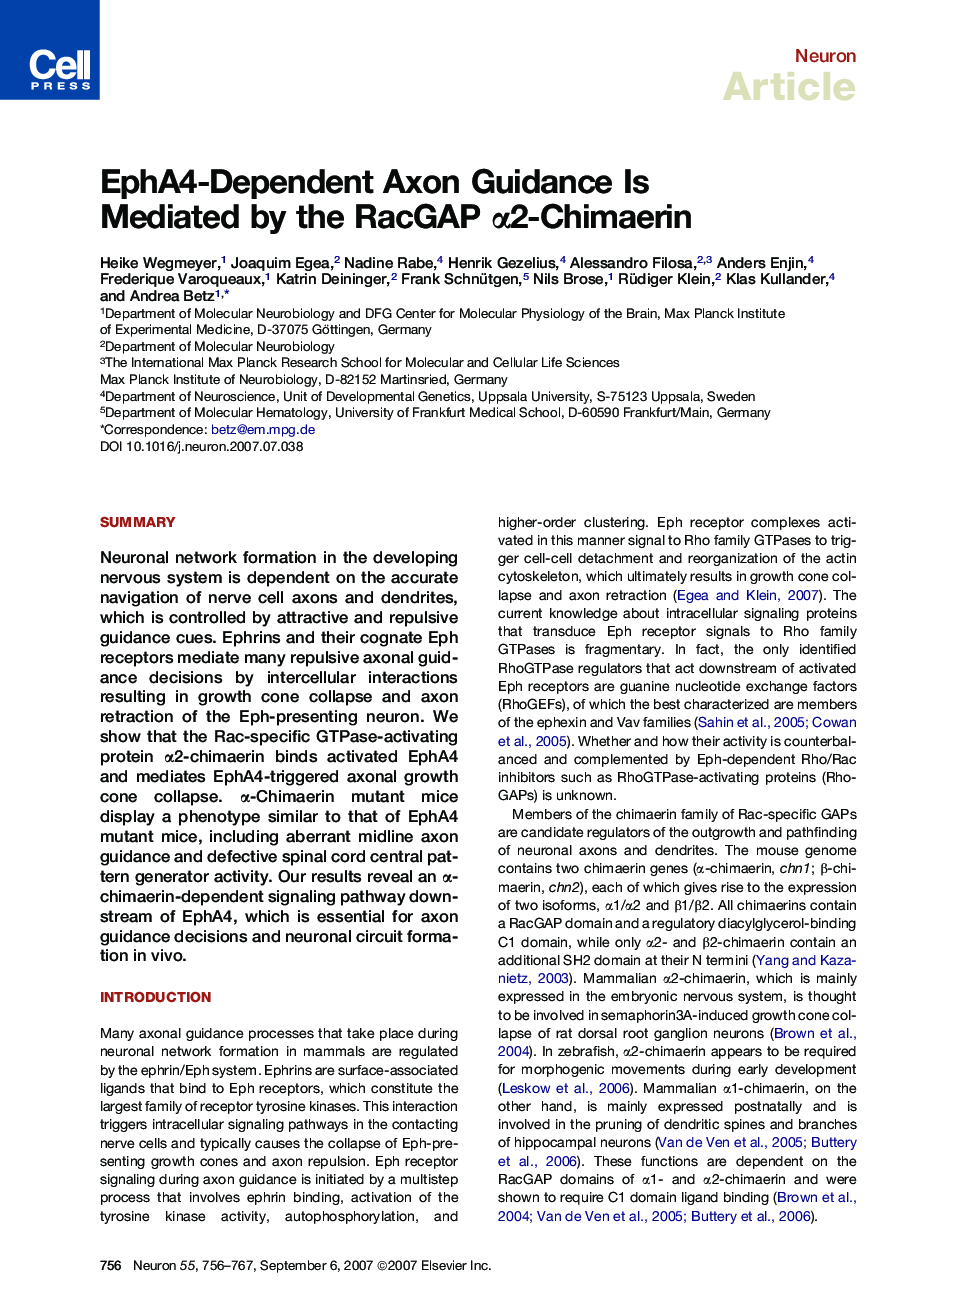 EphA4-Dependent Axon Guidance Is Mediated by the RacGAP α2-Chimaerin